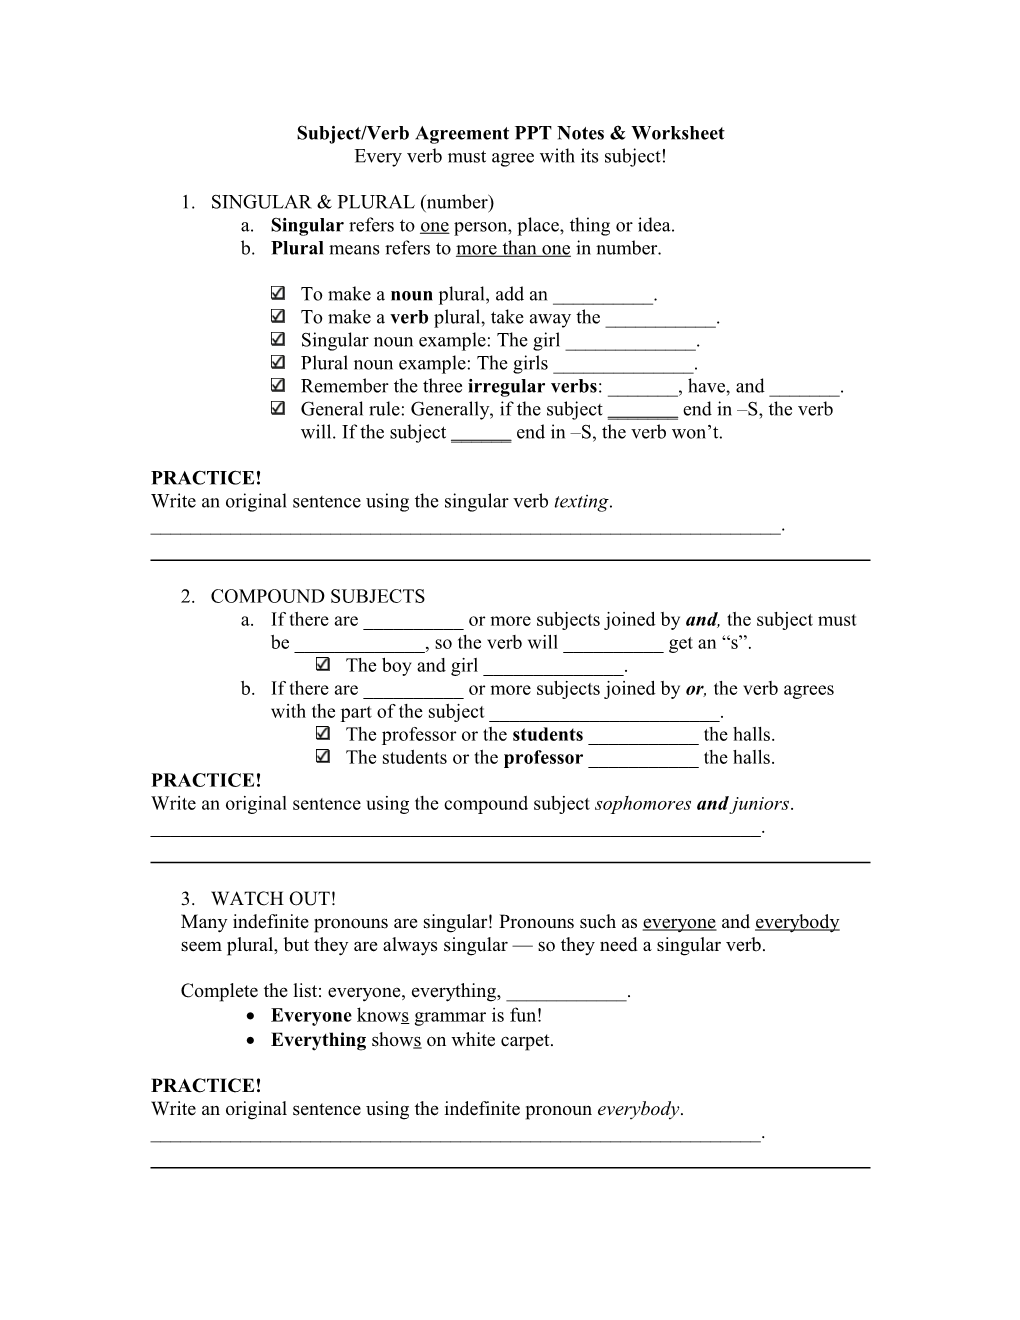 Subject/Verb Agreement PPT Notes & Worksheet